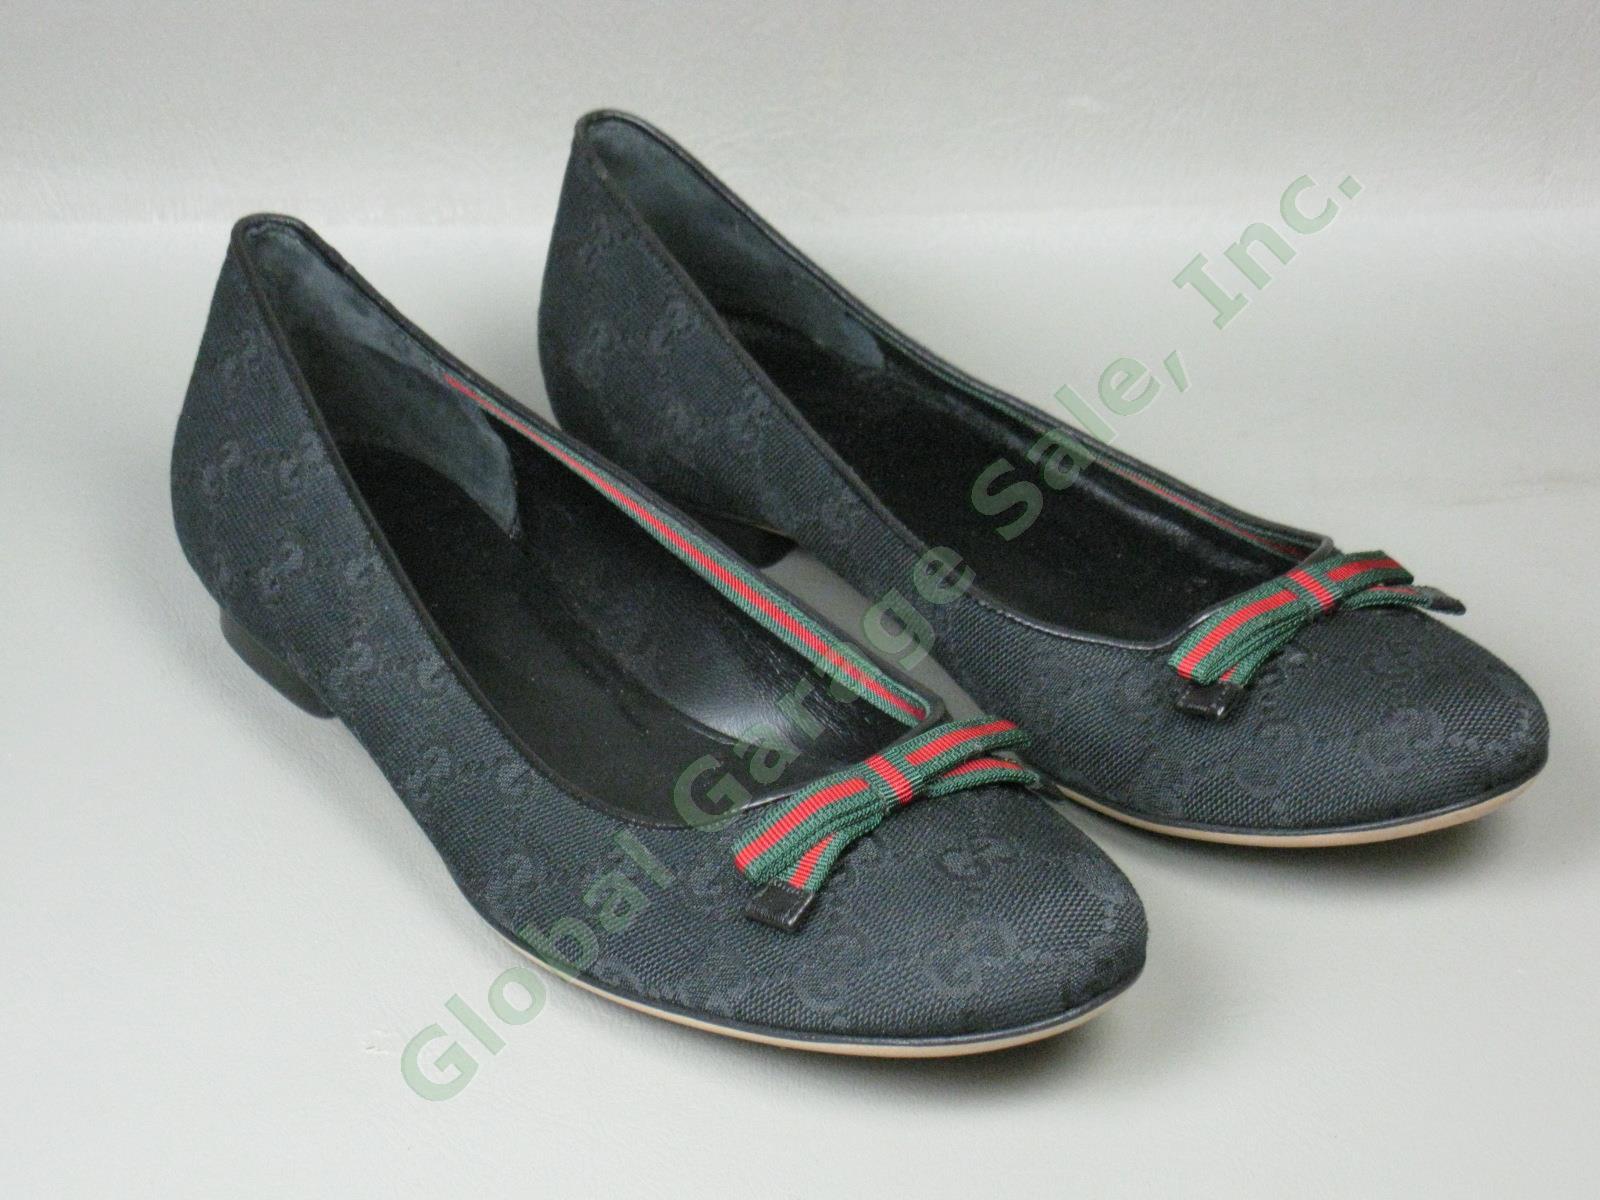 Womens Gucci Moca Tess S Cuoio Flats Size 7.5 Black One Owner With Box 161837 NR 1